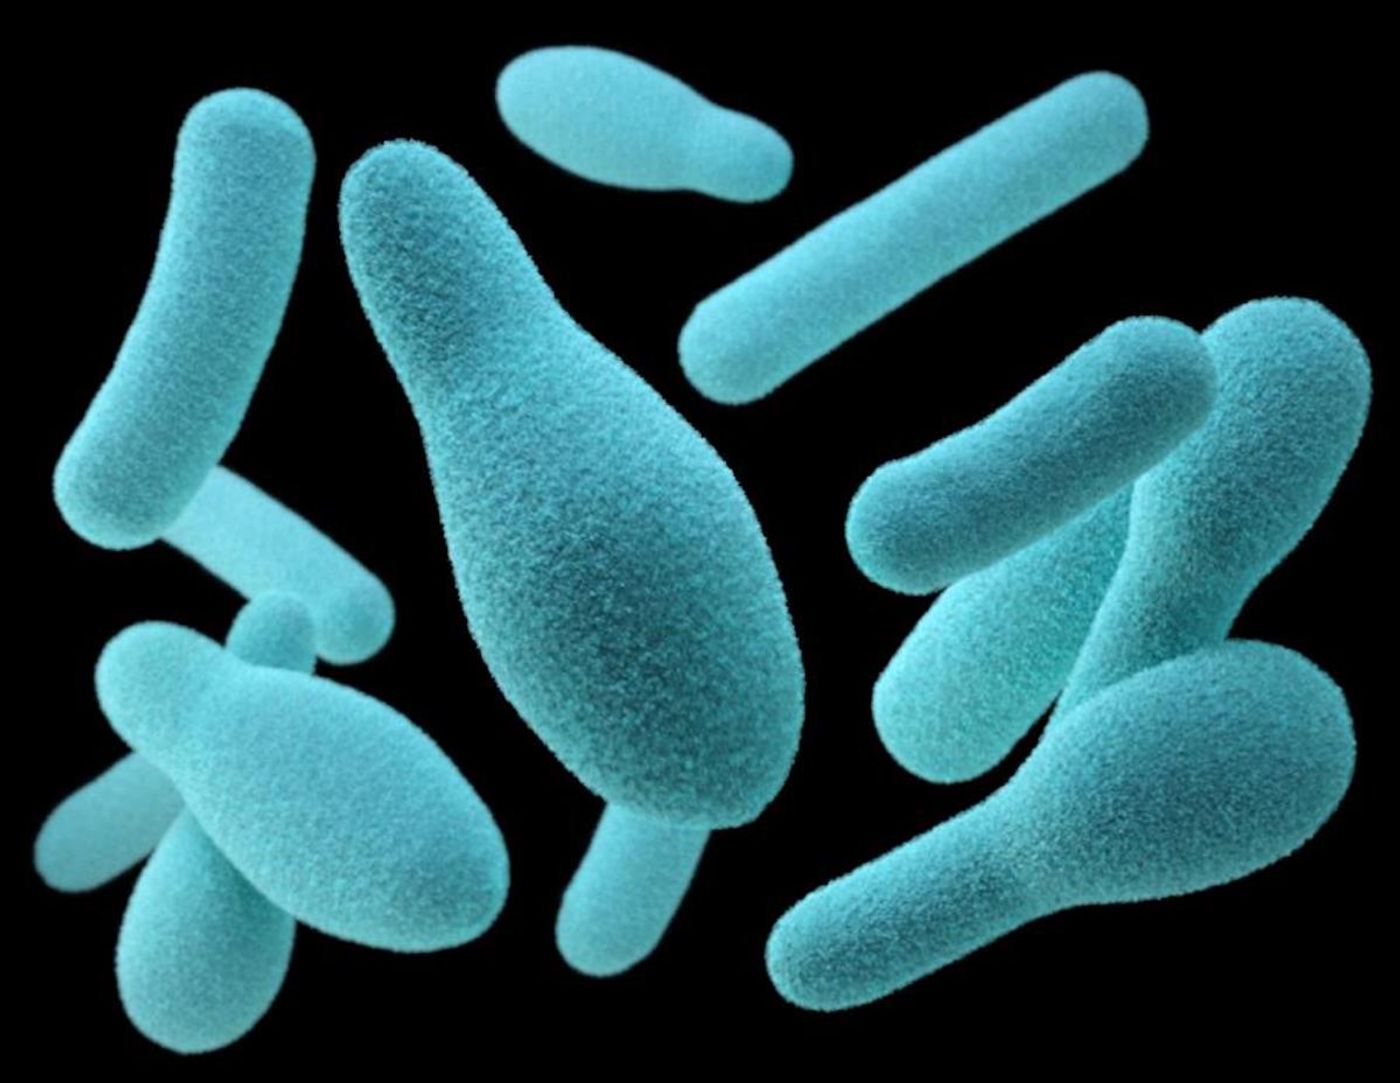 A computer-generated image, based on SEM, of Clostridium sp. organisms. / Credit: CDC/ James Archer